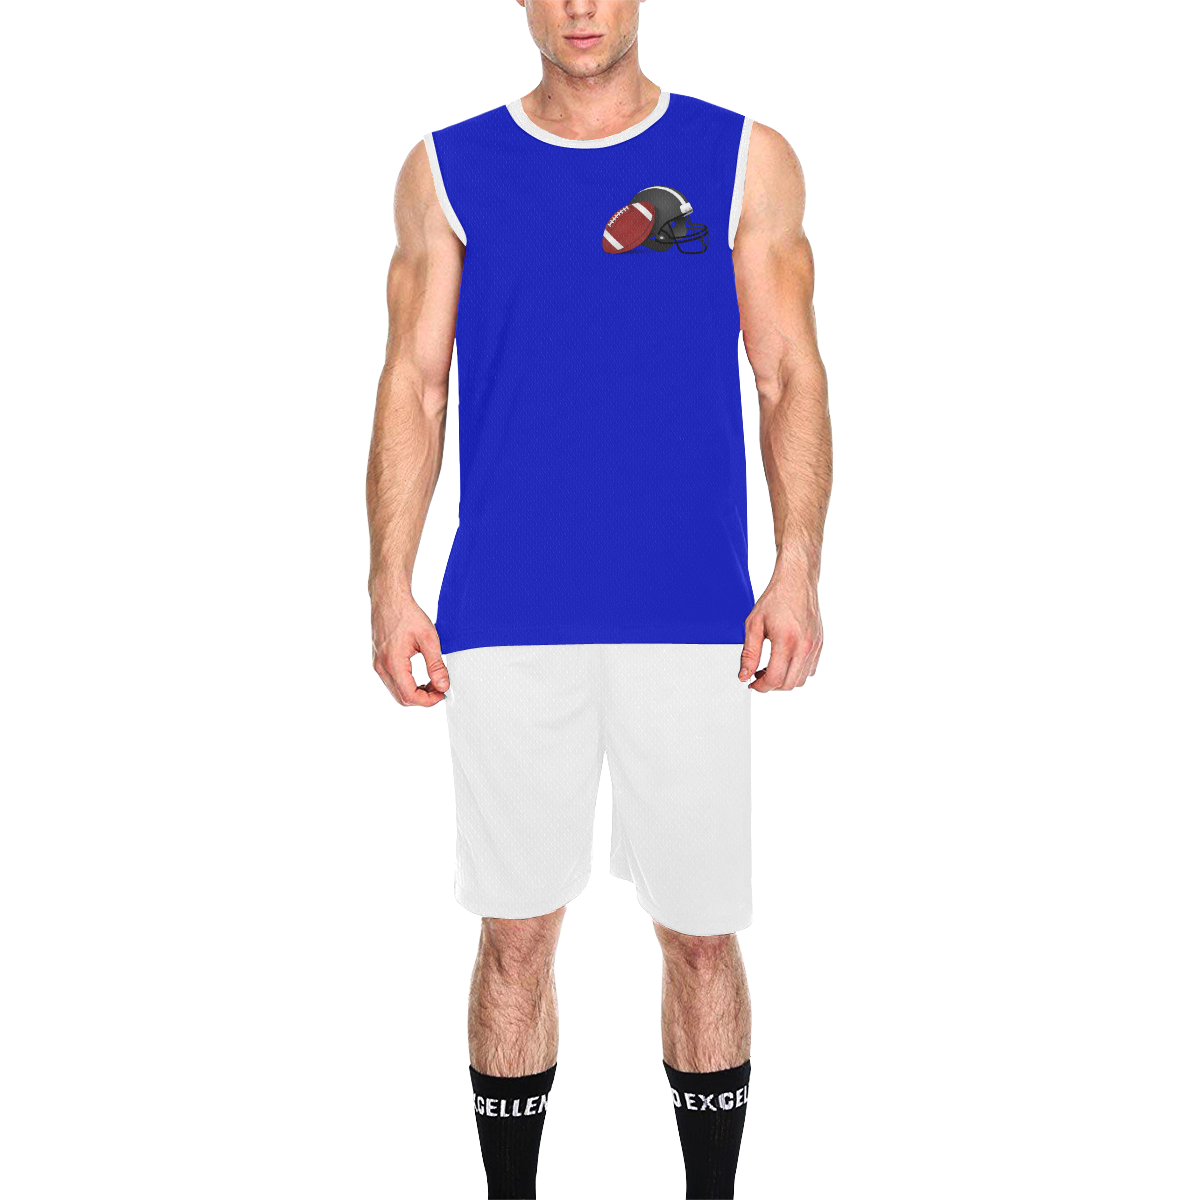 Football and Football Helmet Sports White and Blue All Over Print Basketball Uniform